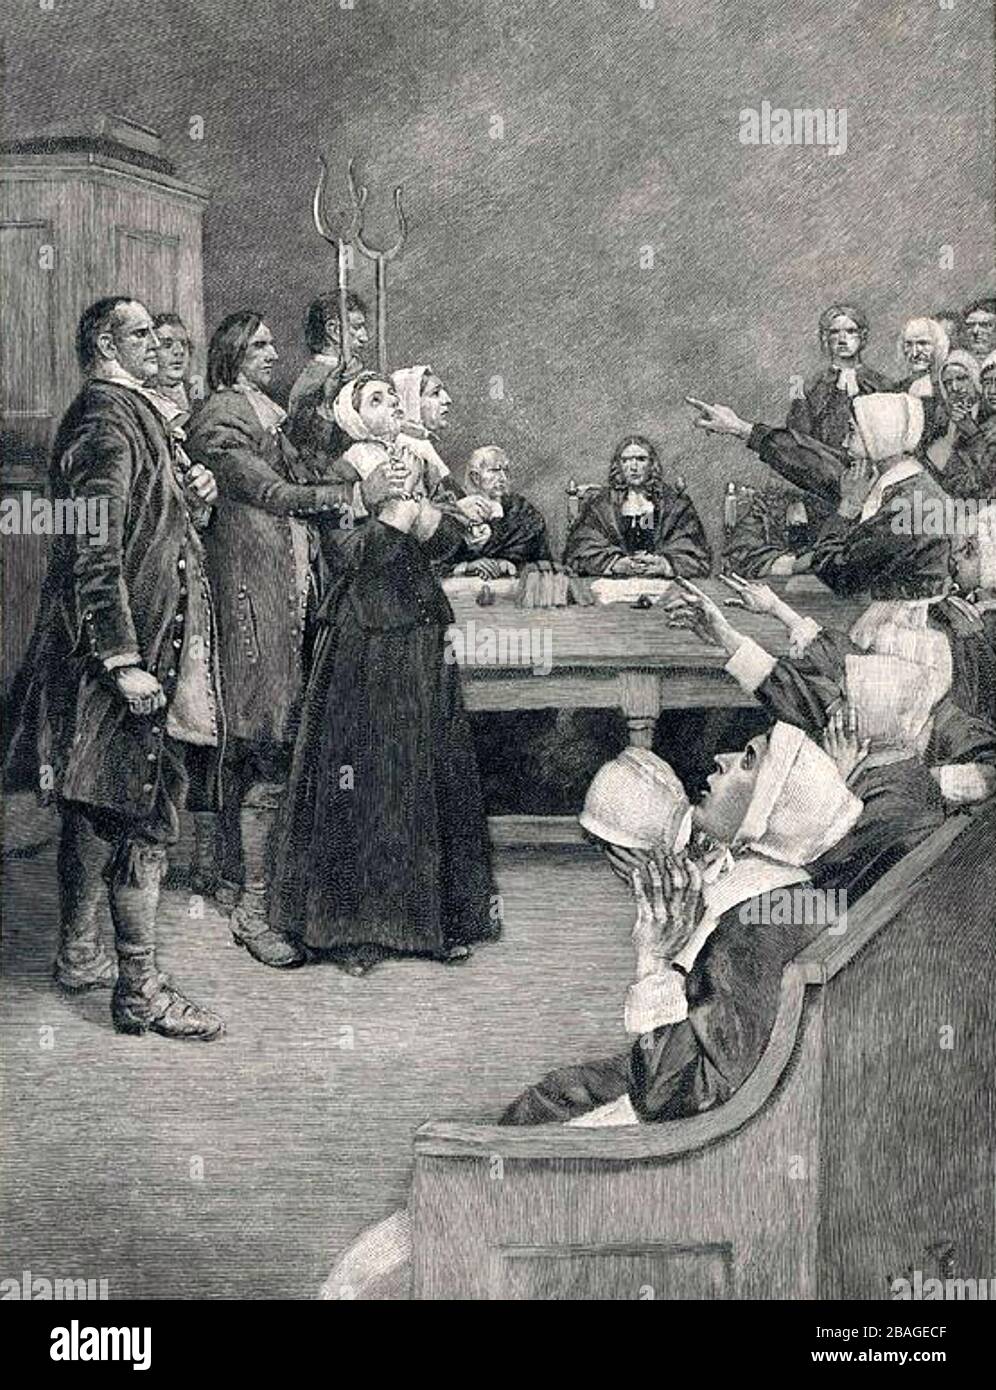 SALEM WITCH TRIALS 1692-1693 in a 19th century engraving Stock Photo